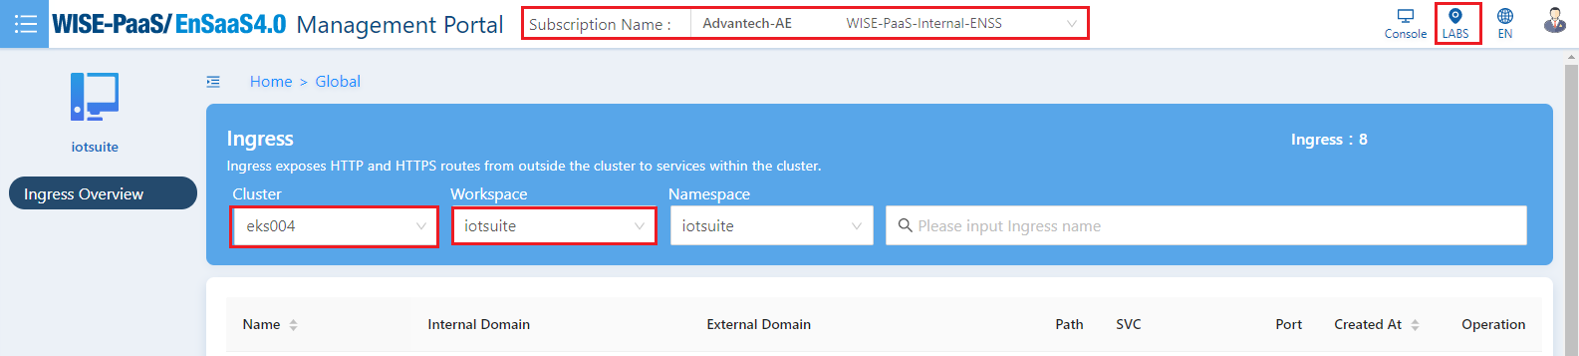 WISE-PaaS Cluster and Workspace